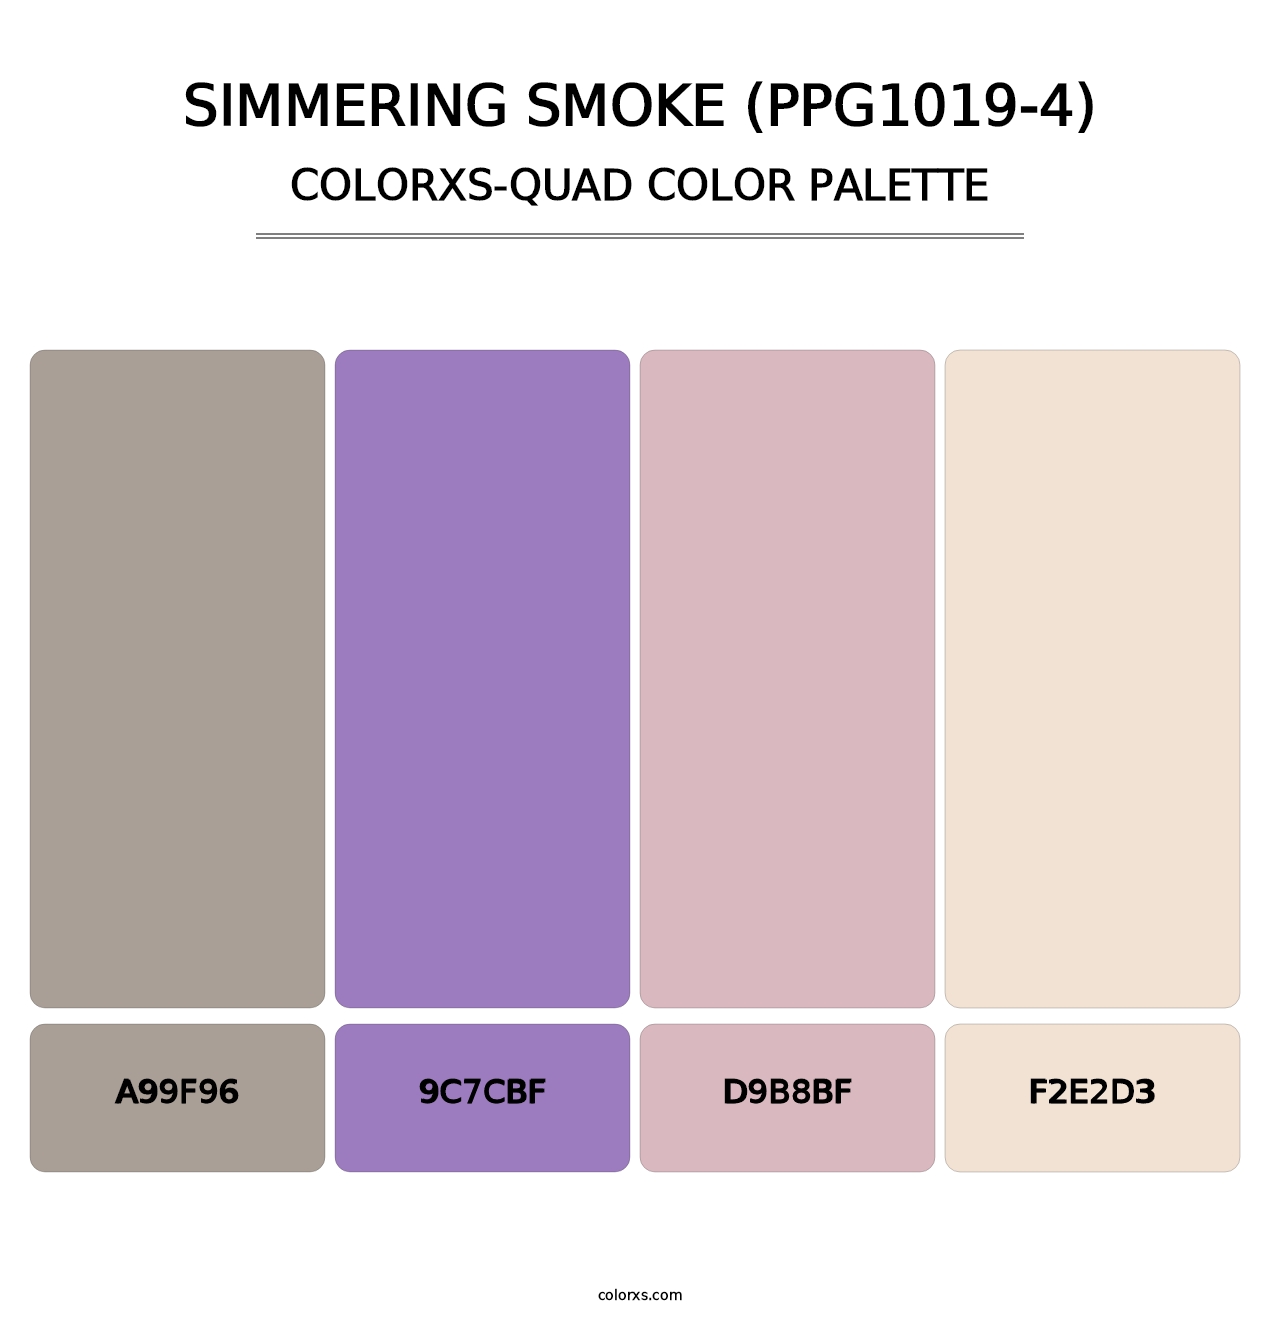 Simmering Smoke (PPG1019-4) - Colorxs Quad Palette